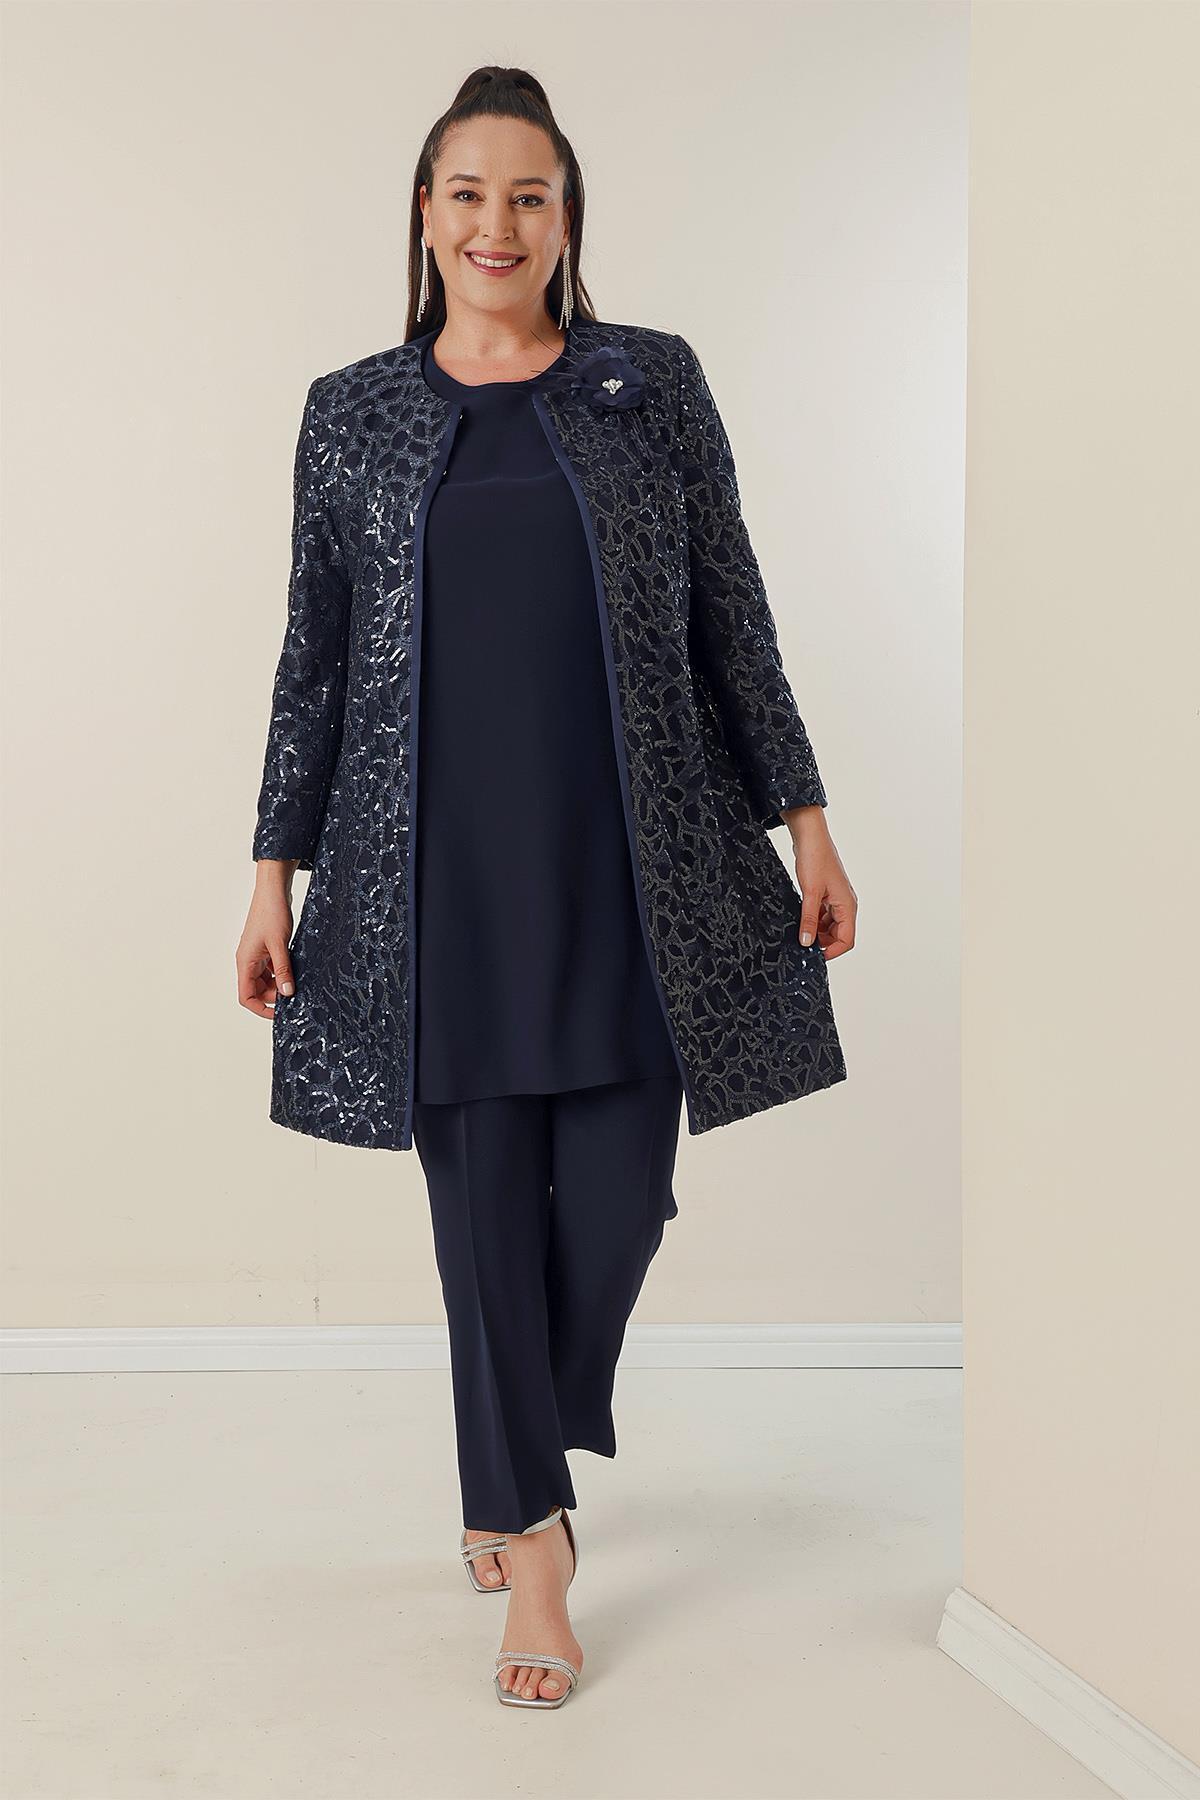 By Saygı Crepe blouse with slits in the sides and fleece lined front, jacket and pants Plus Size 3-piece Set.